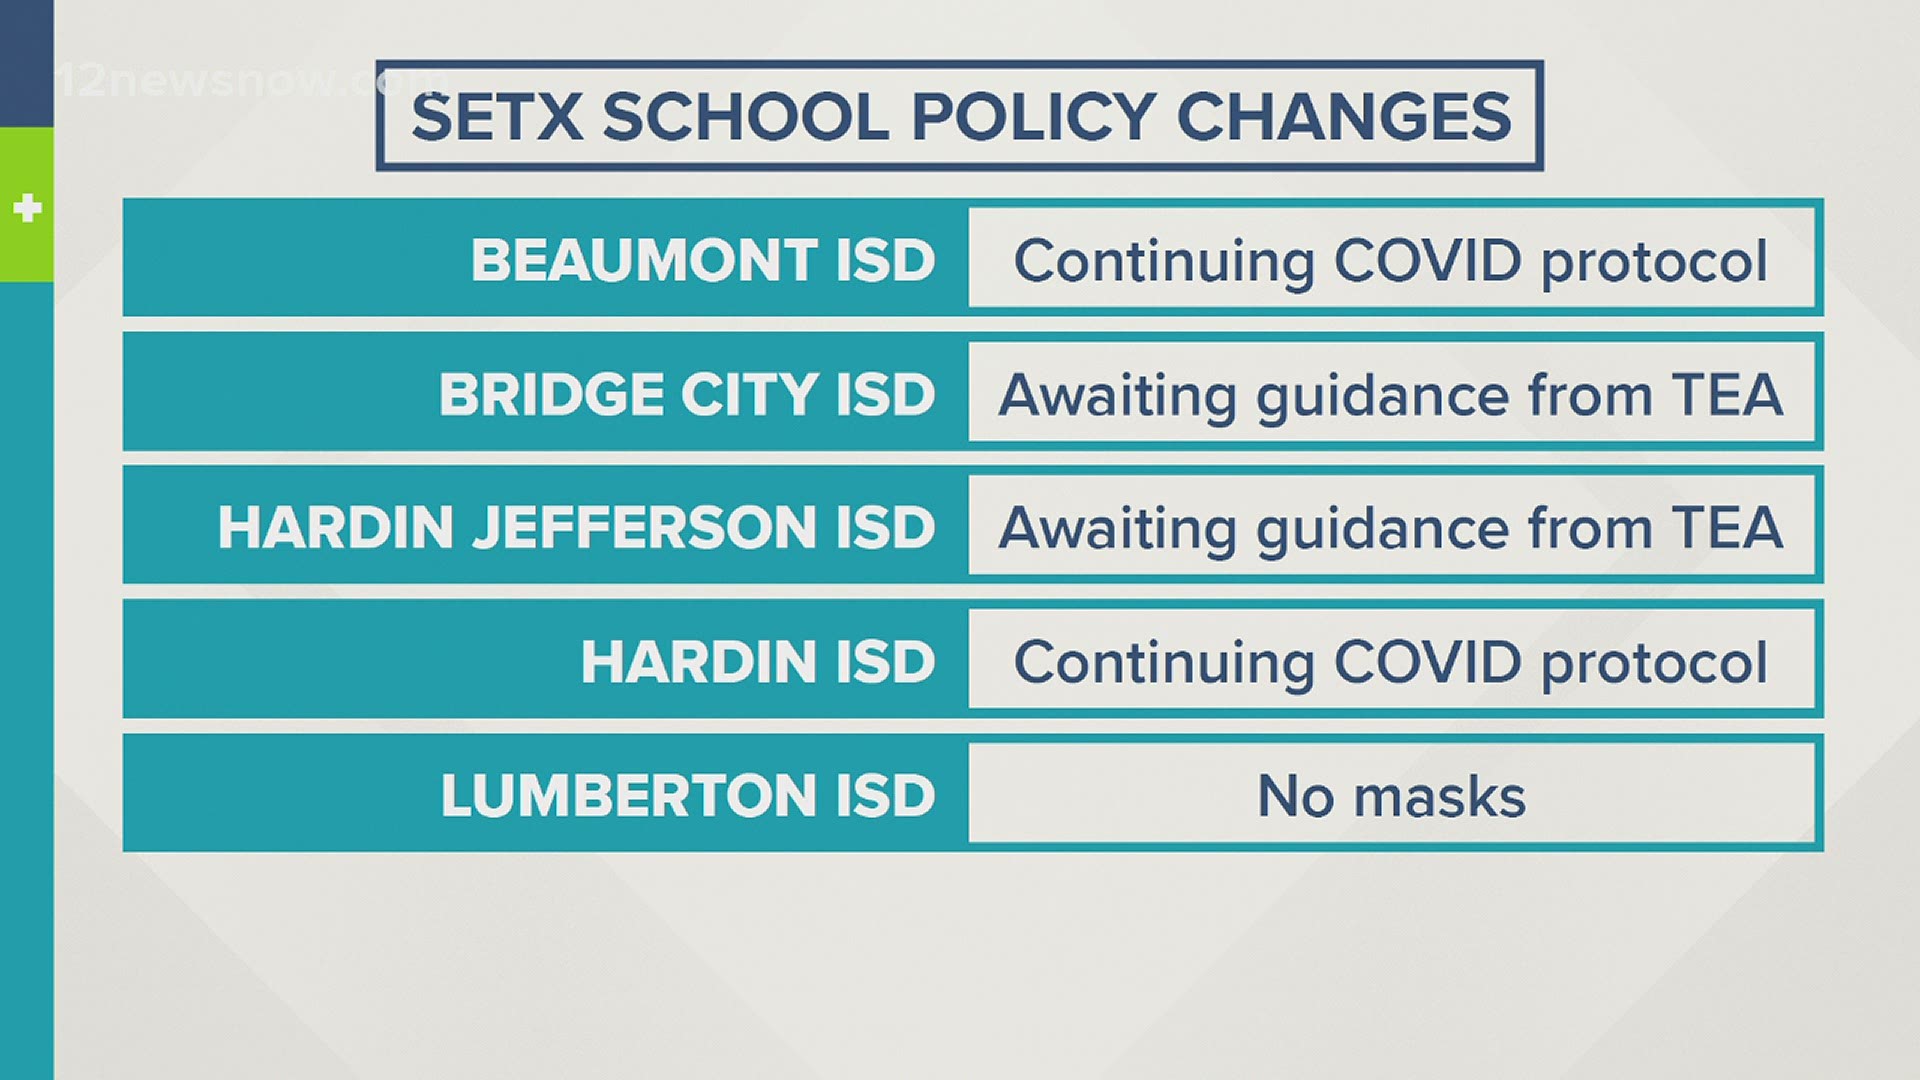 School districts across Southeast Texas have issued a response following the announcement. Most of the schools are waiting on more guidance from the TEA.